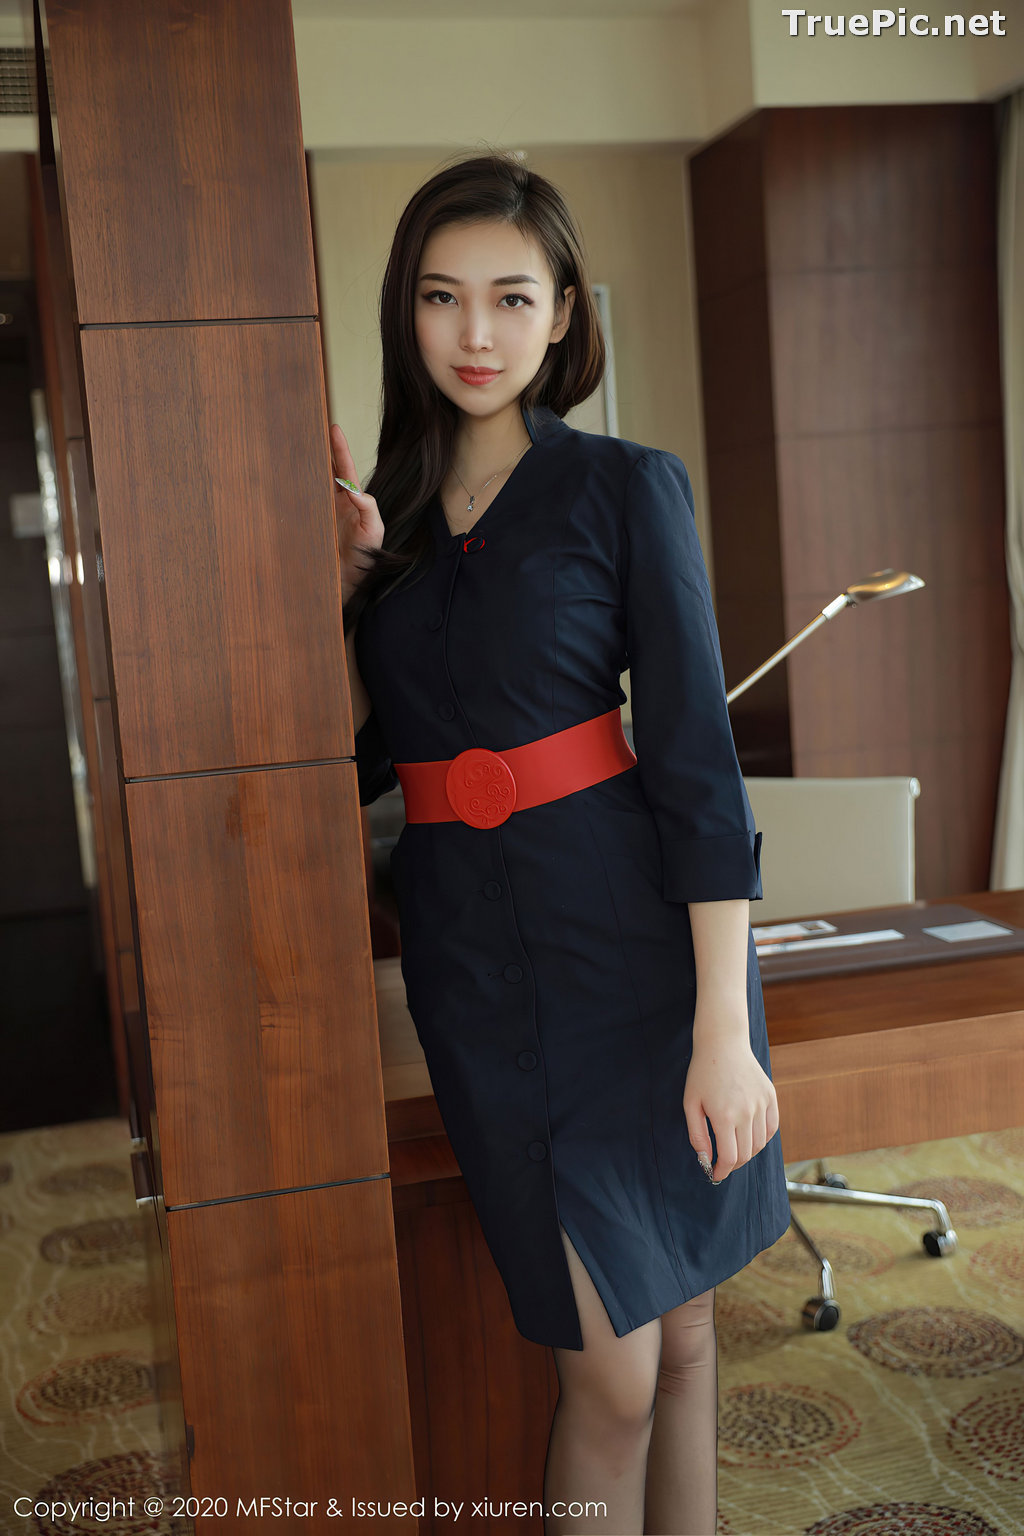 Image MFStar Vol.404 – Chinese Model – Zheng Ying Shan (郑颖姗) – Sexy Office Girl - TruePic.net - Picture-19